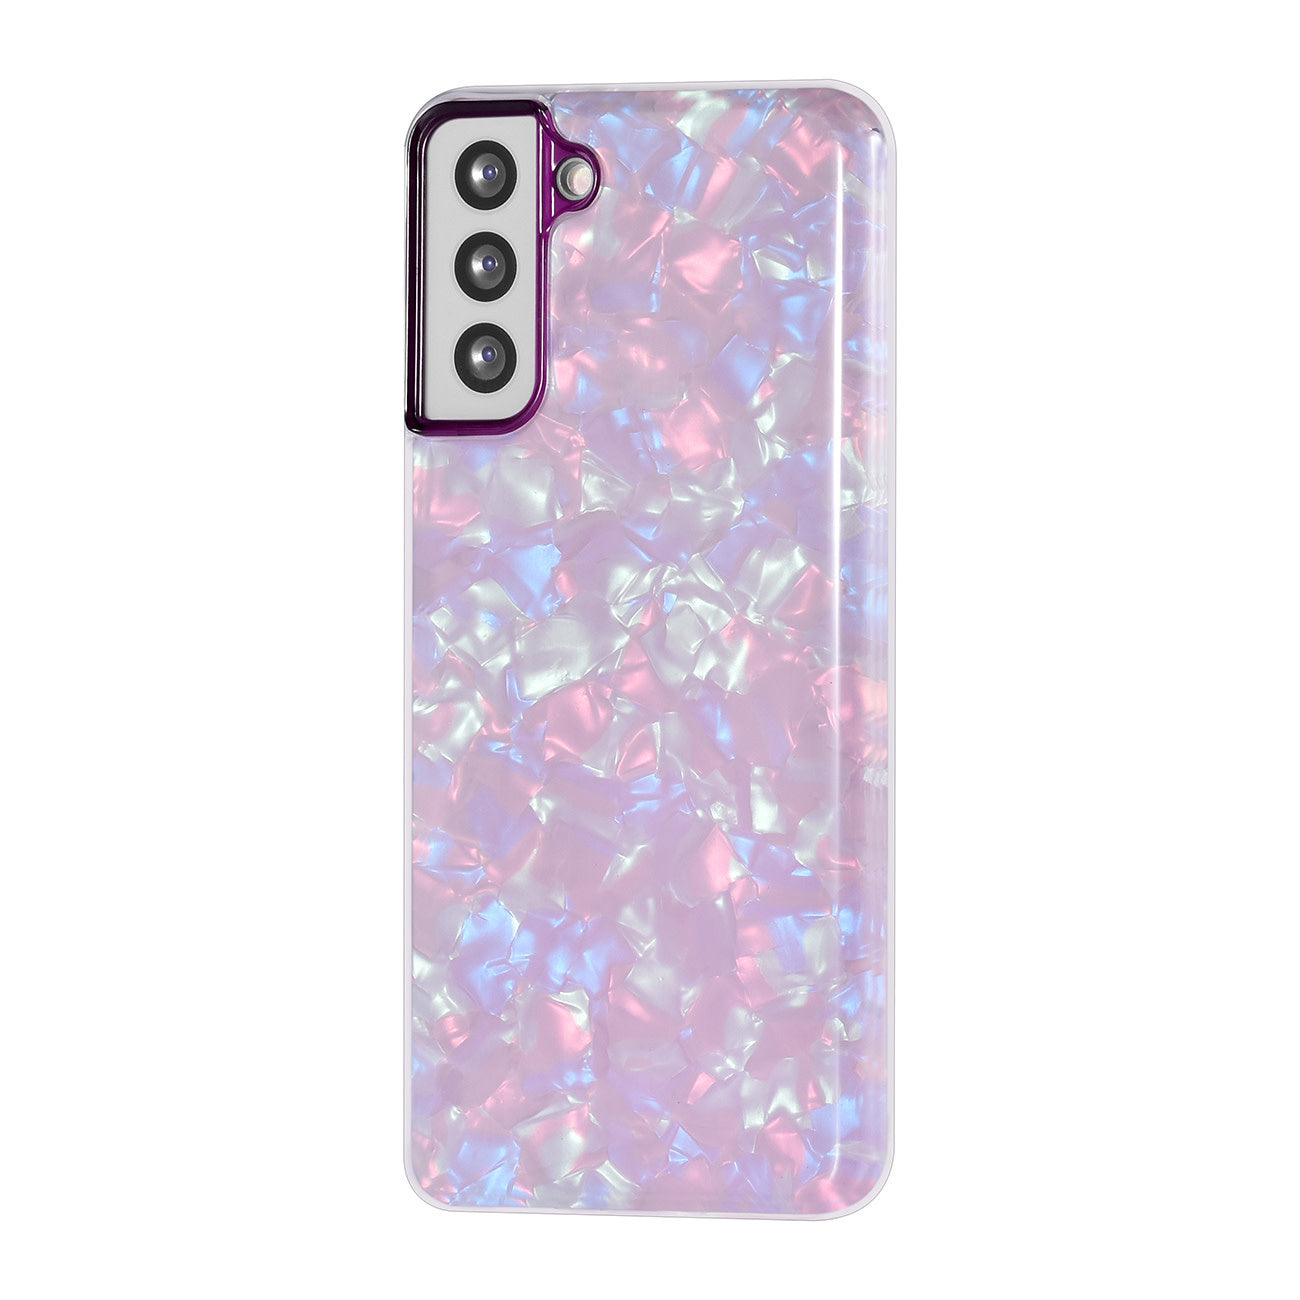 Samsung S21 Plus Backcover - Popsocket - Paars